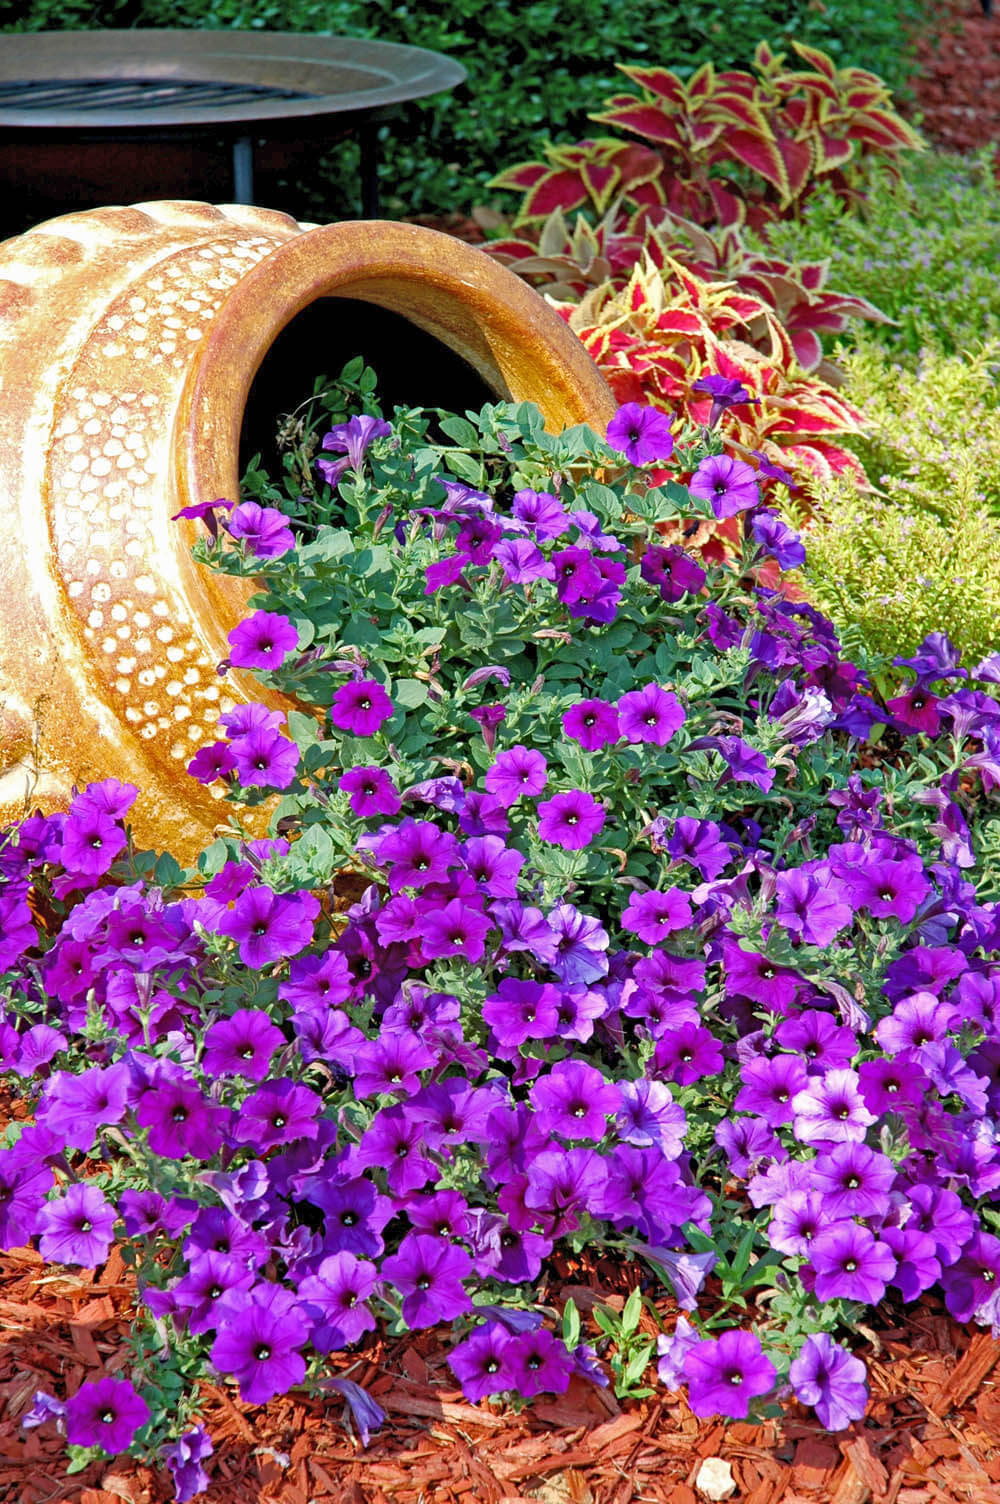 Petunias Overflowing from a Tilted Planter